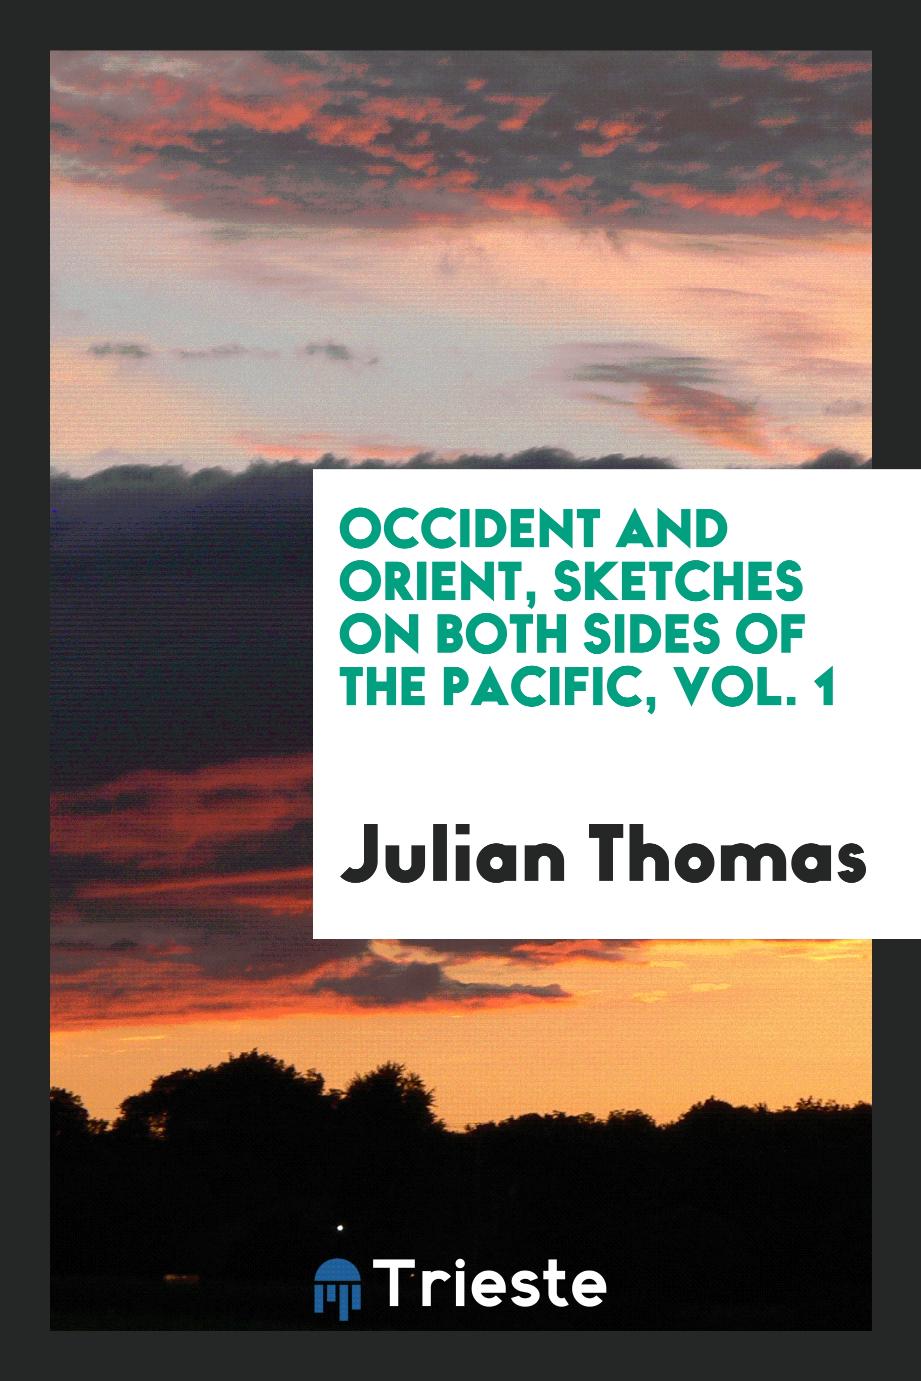 Occident and Orient, sketches on both sides of the Pacific, Vol. 1